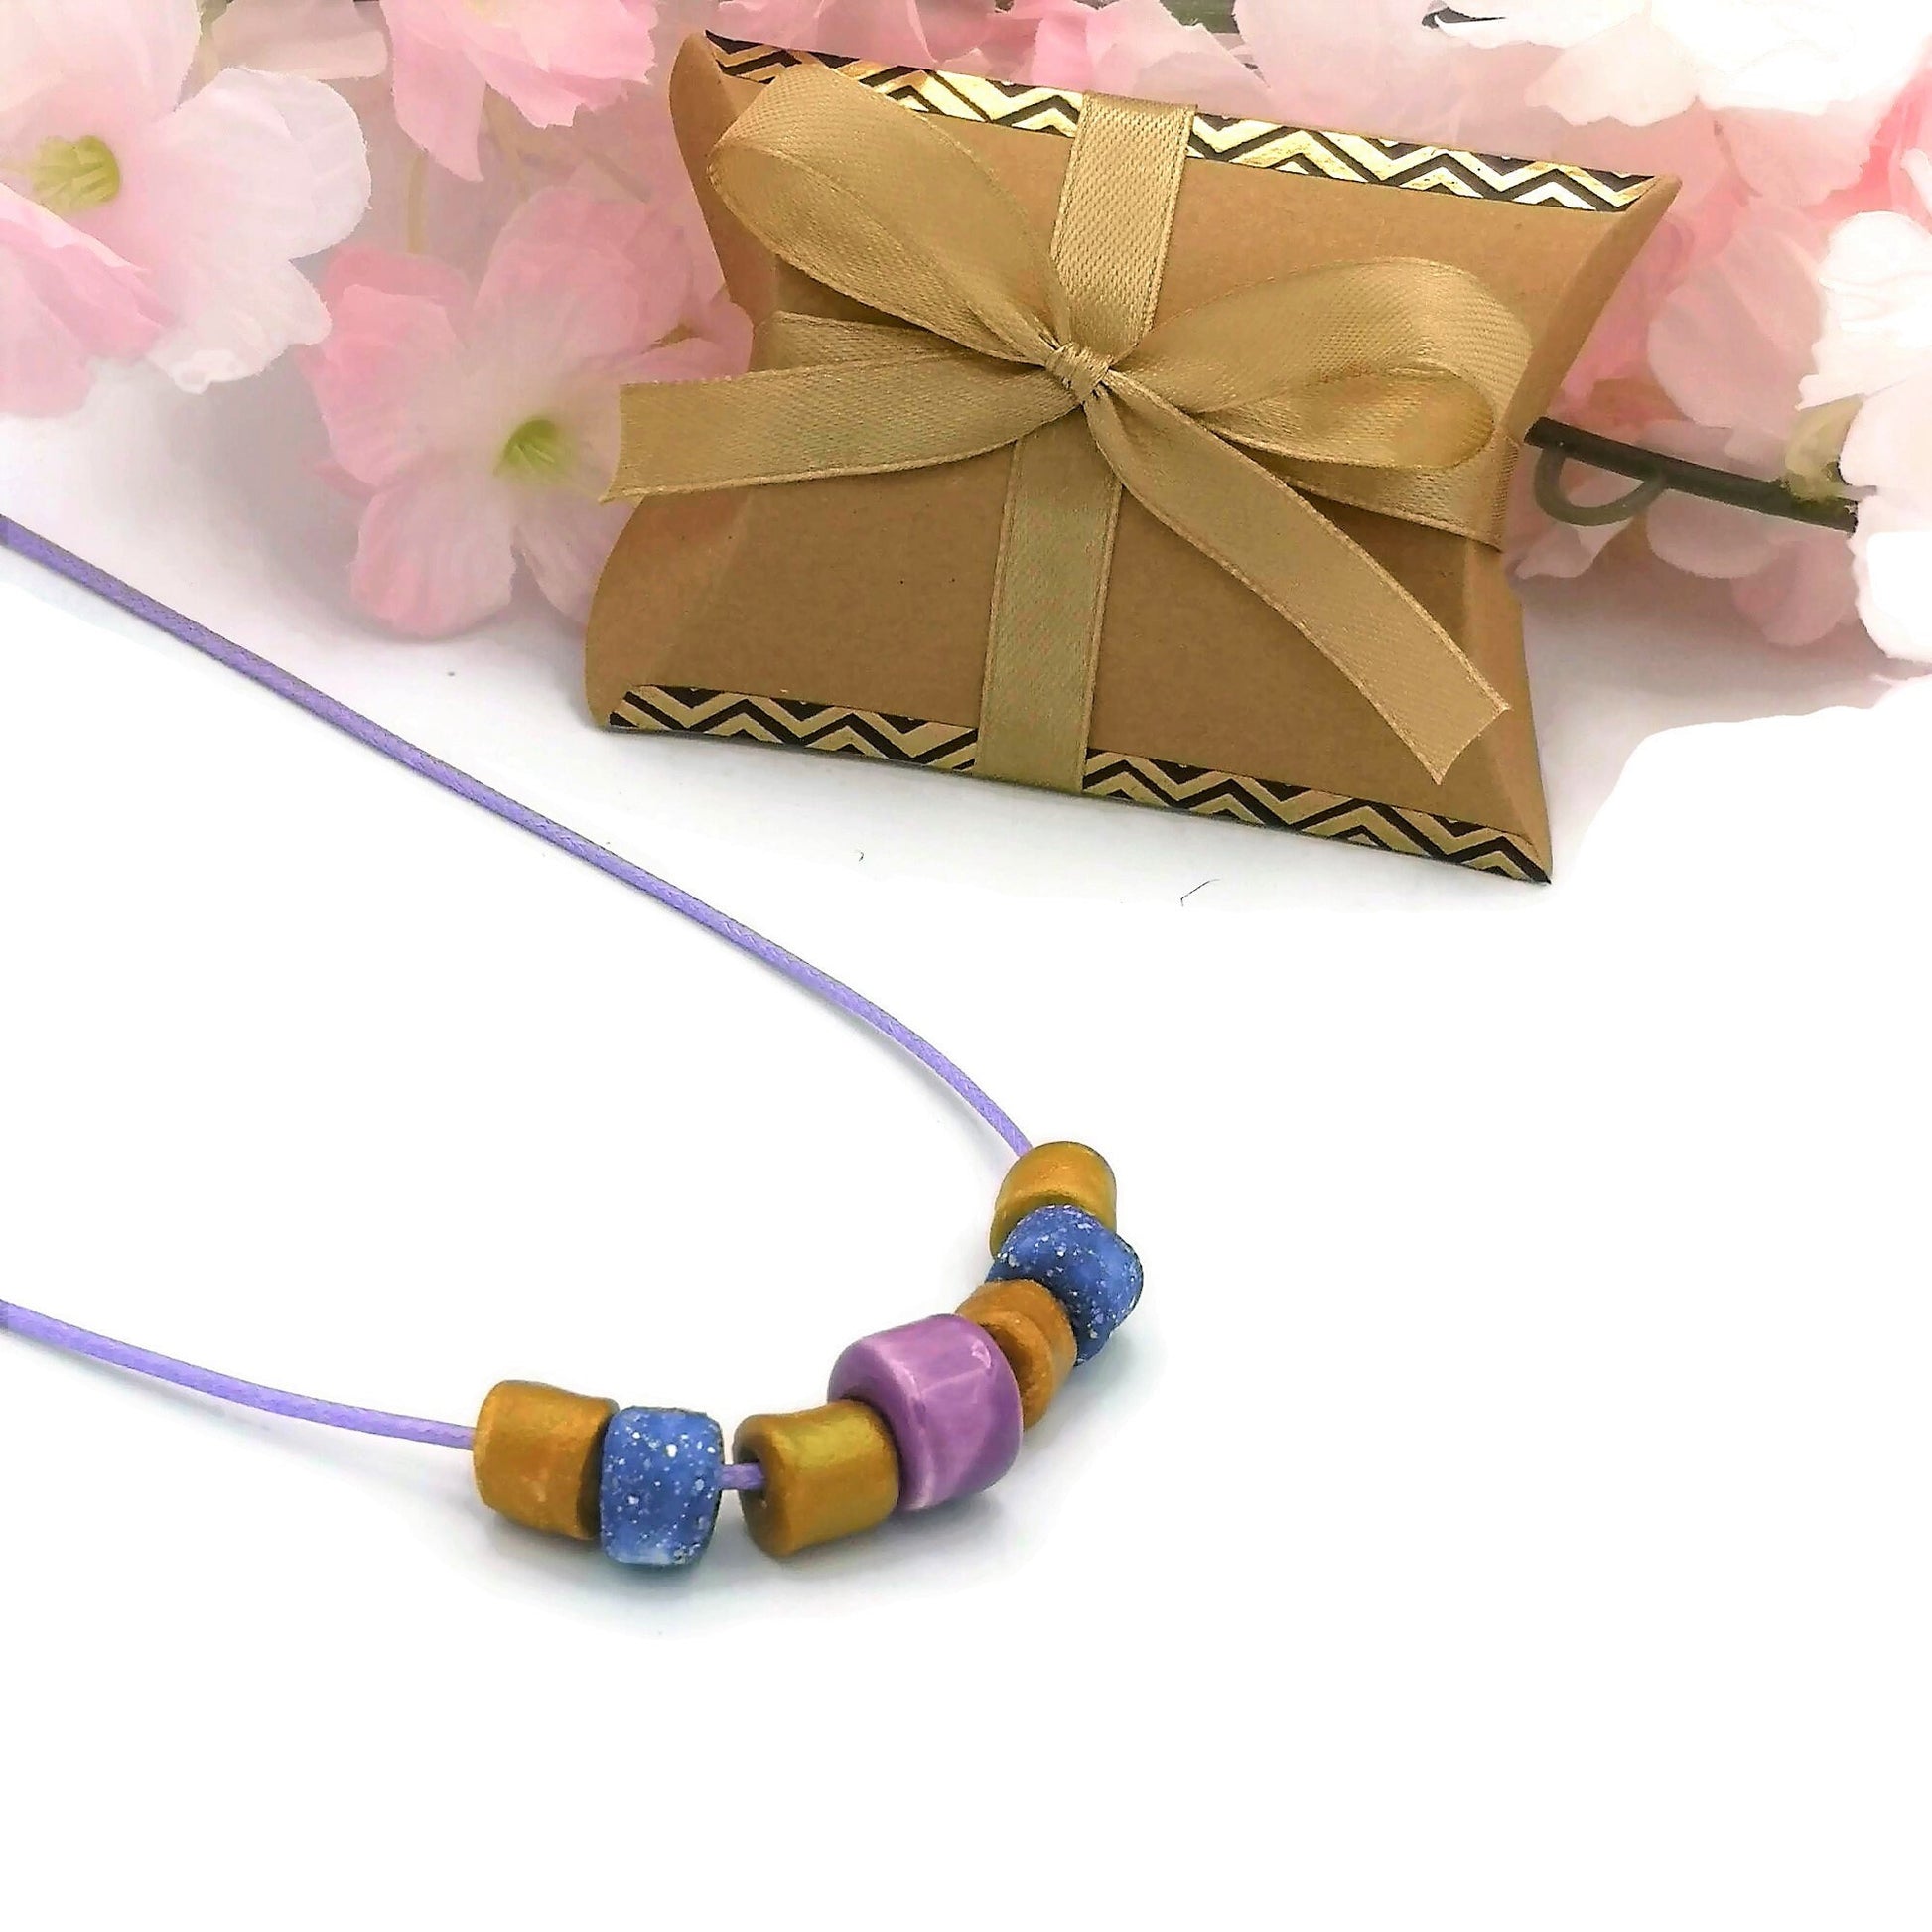 Everyday Necklace, Trendy Beaded Necklace Best Gifts For Her, Colorful Aesthetic Mothers Day Gift From Daugher, Boho Statement Necklace - Ceramica Ana Rafael